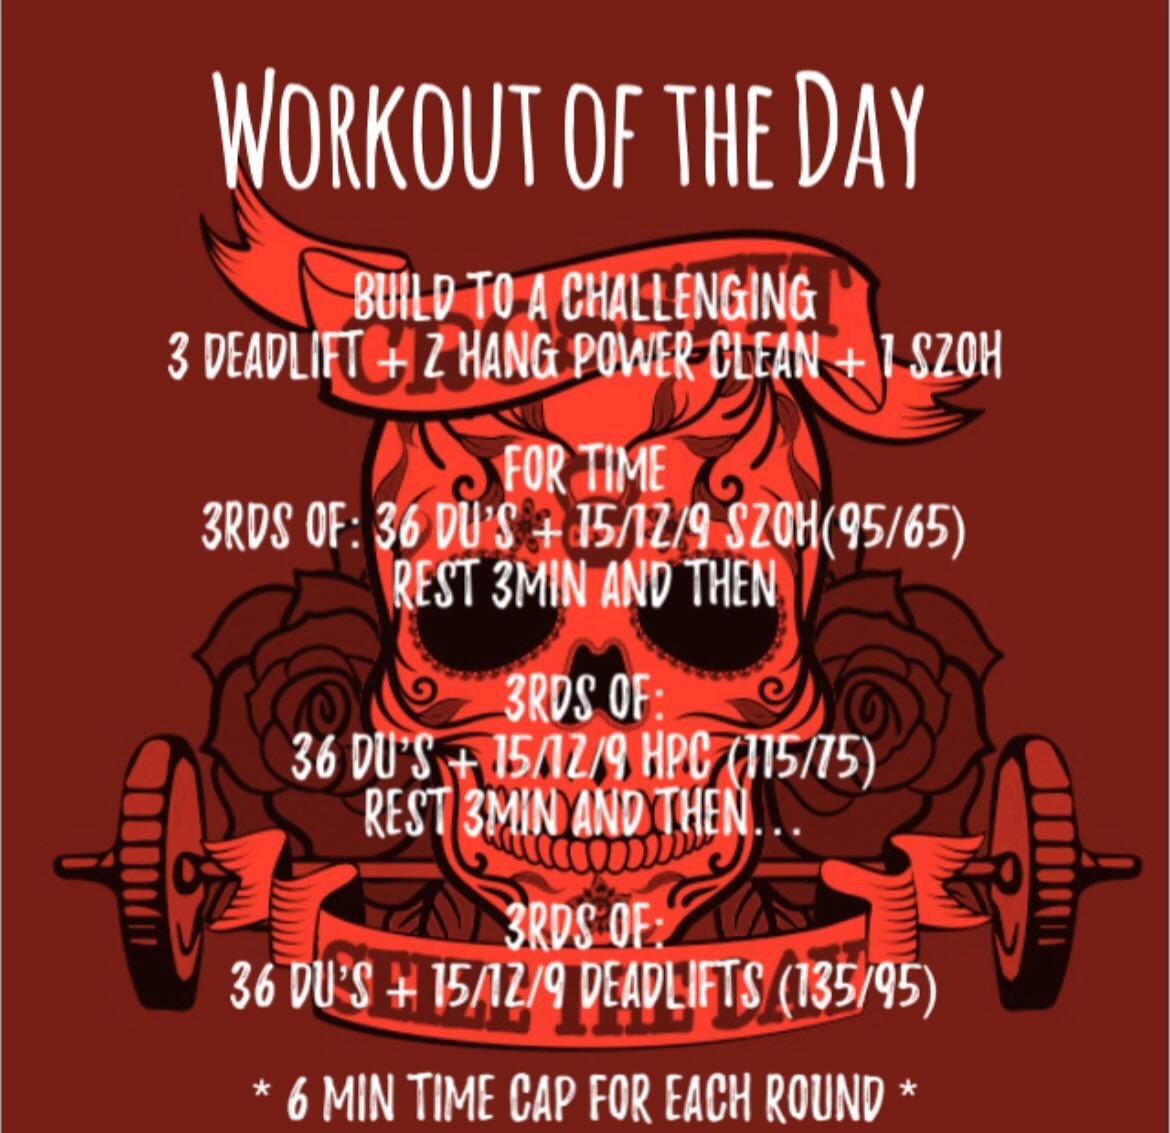 Saturday, April 27, 2024

Part 1 &ndash; build to a challenging complex of:
3 Deadlift + 2 Hang Power Clean + 1 SH 2 OH
....
Part 2 &ndash; against a running clock:
3 rounds of: 36 DU&rsquo;s 15/12/9 &nbsp;Shoulder to Overhead (95/65)  Rest 3min and 